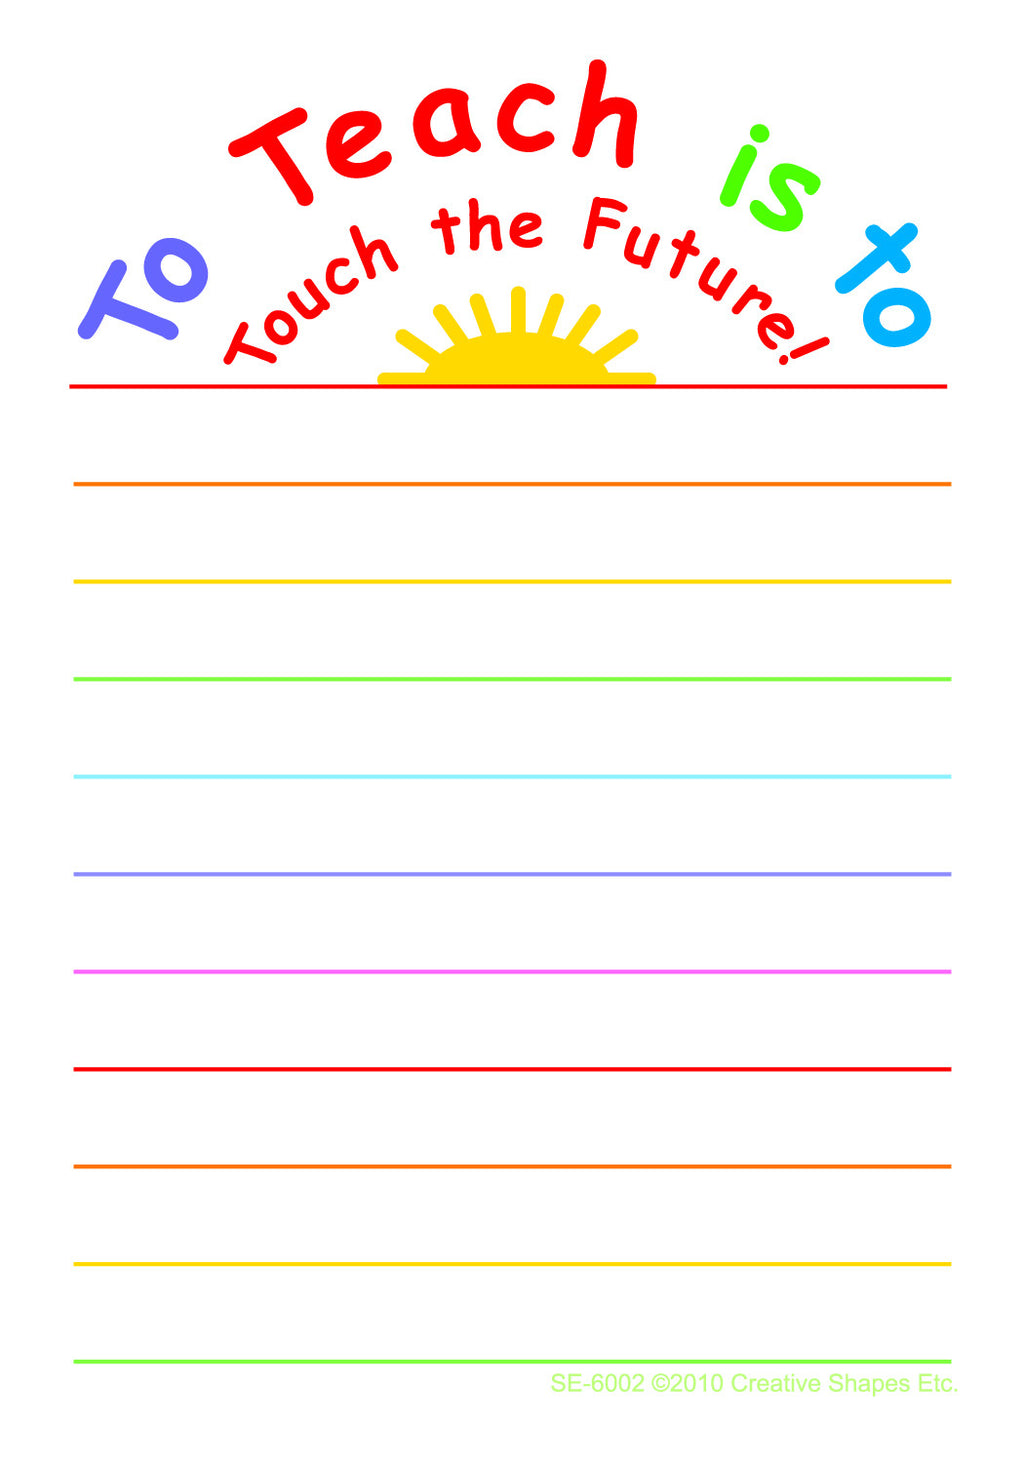 Notes & Quotes - Touch the Future - Creative Shapes Etc.